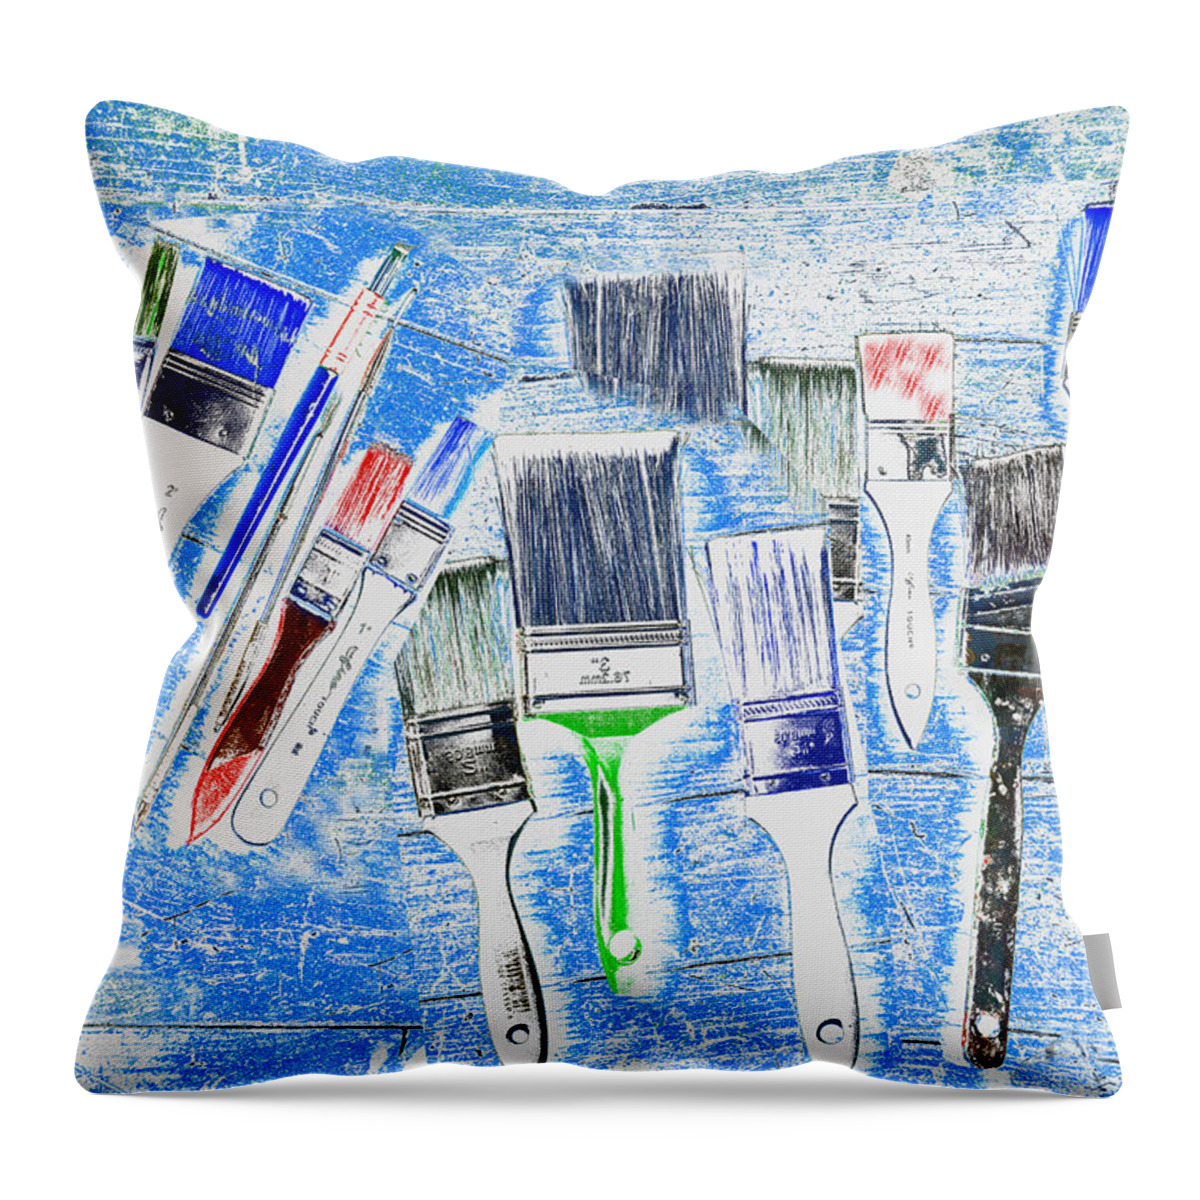 Paintbrushes Throw Pillow featuring the mixed media Paintbrush Abstract by Kae Cheatham